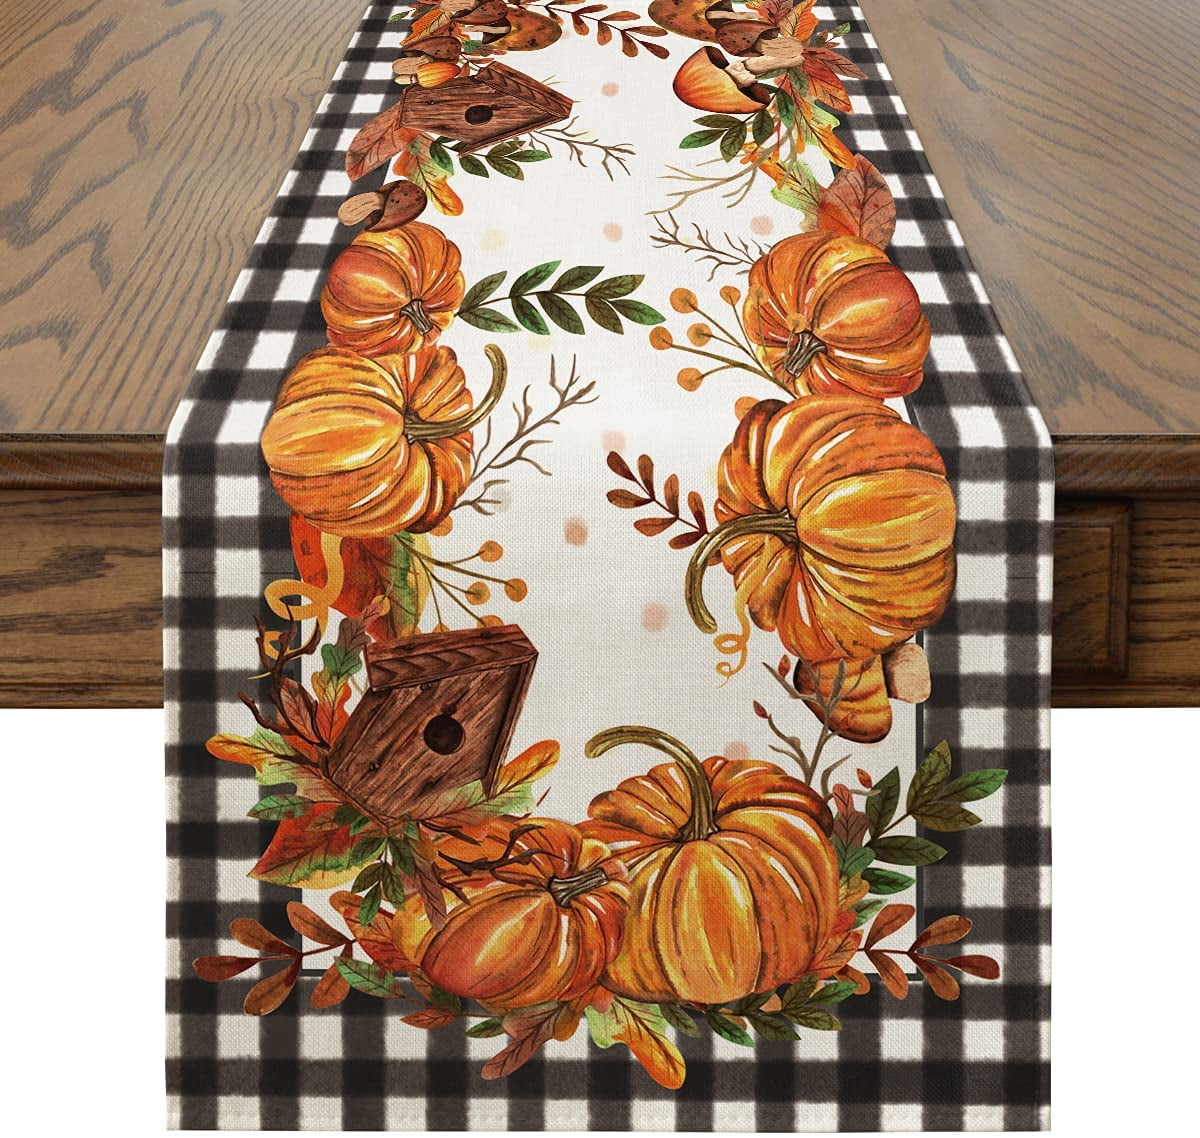 Seasonal Fall Harvest Kitchen Dining Table Runners for Indoor Outdoor Home Party Decor 13 x 72 Inch Artoid Mode Grateful Thankful Blessed Pumpkins Table Runner 